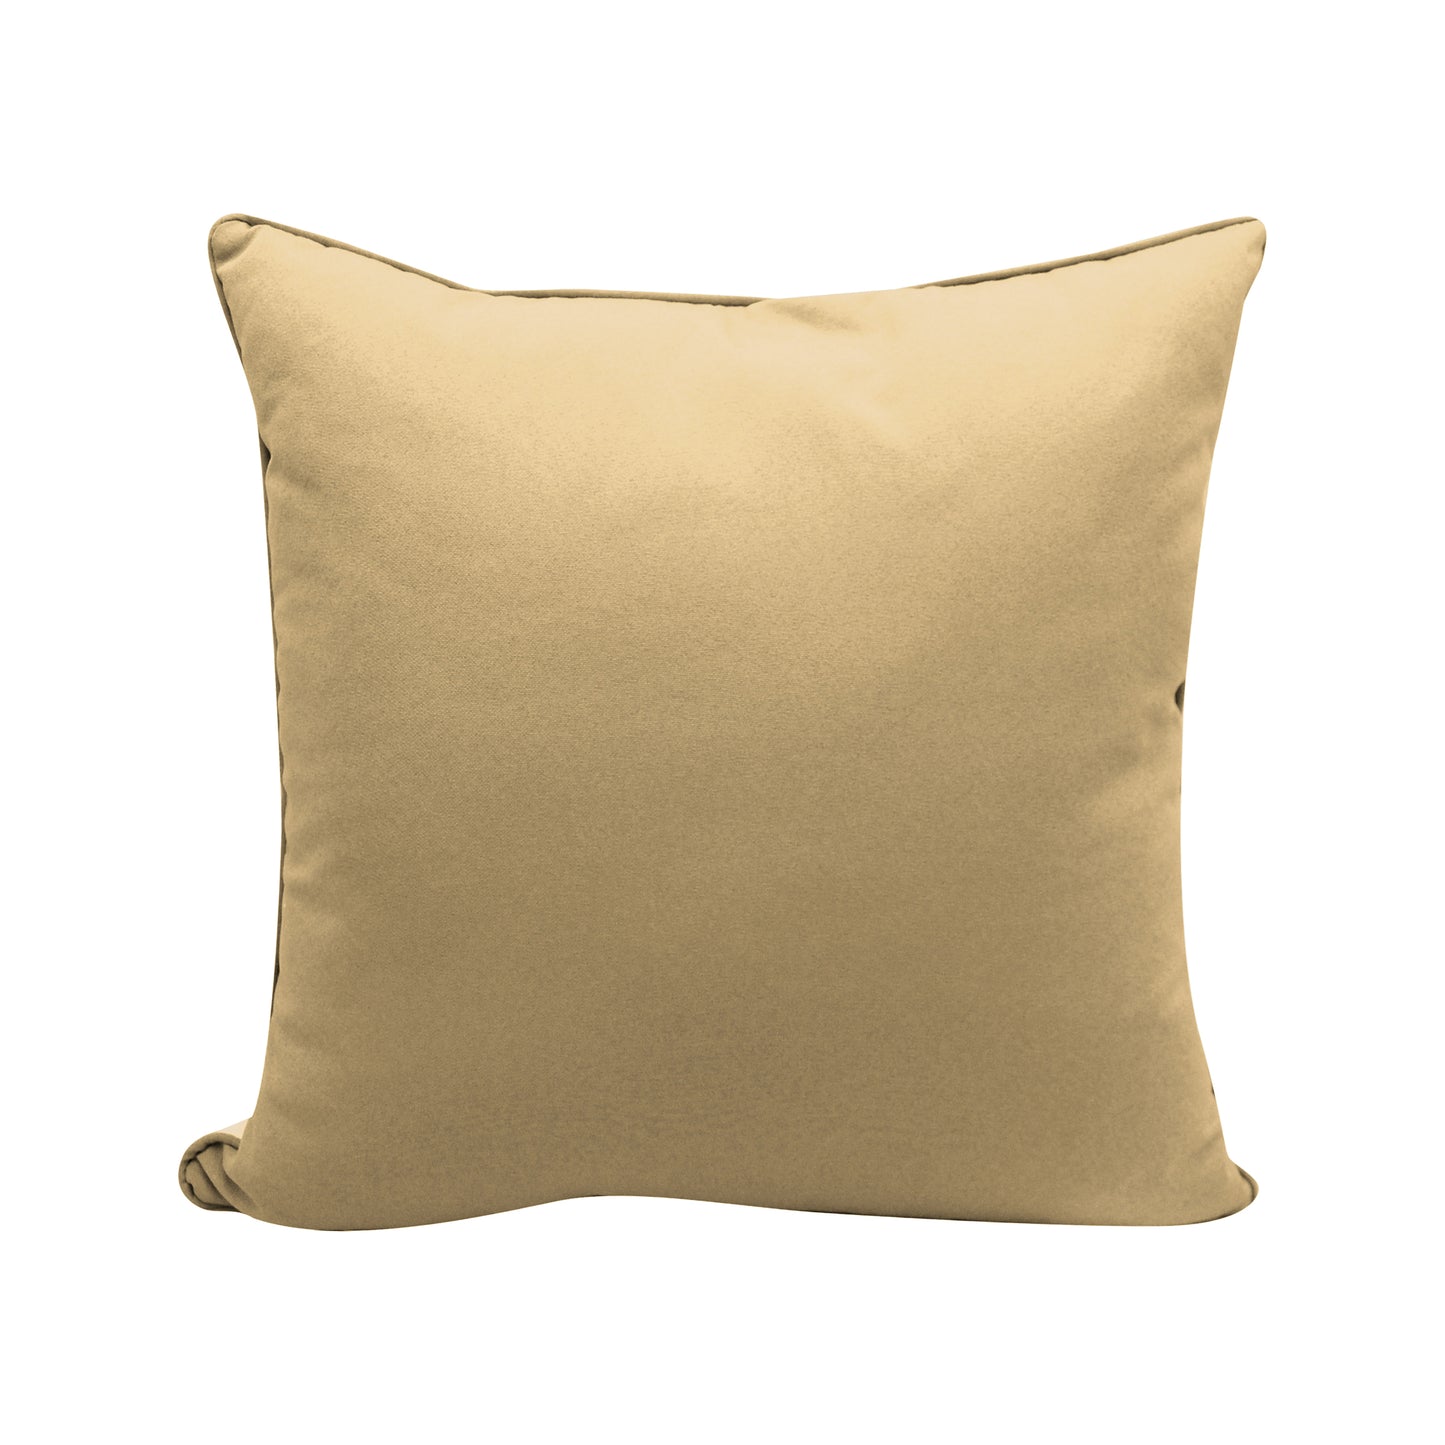 Solid gold fabric; the back of the Flamingo Fancy pillow.